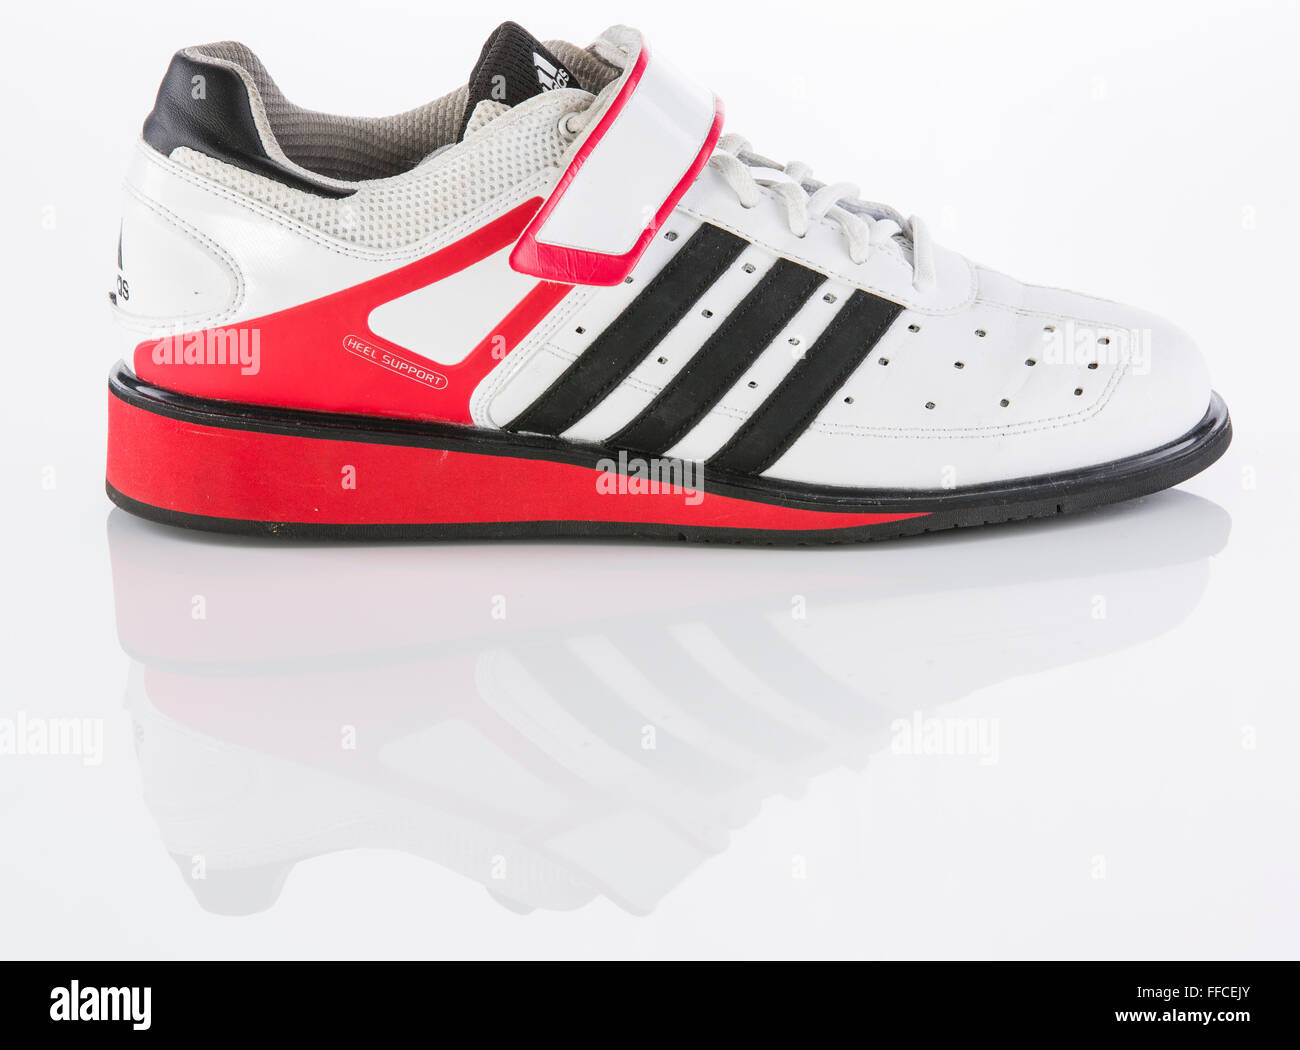 Tung lastbil hvis Vær venlig Adidas Olympic weightlifting shoes on a white background with a reflection  Stock Photo - Alamy